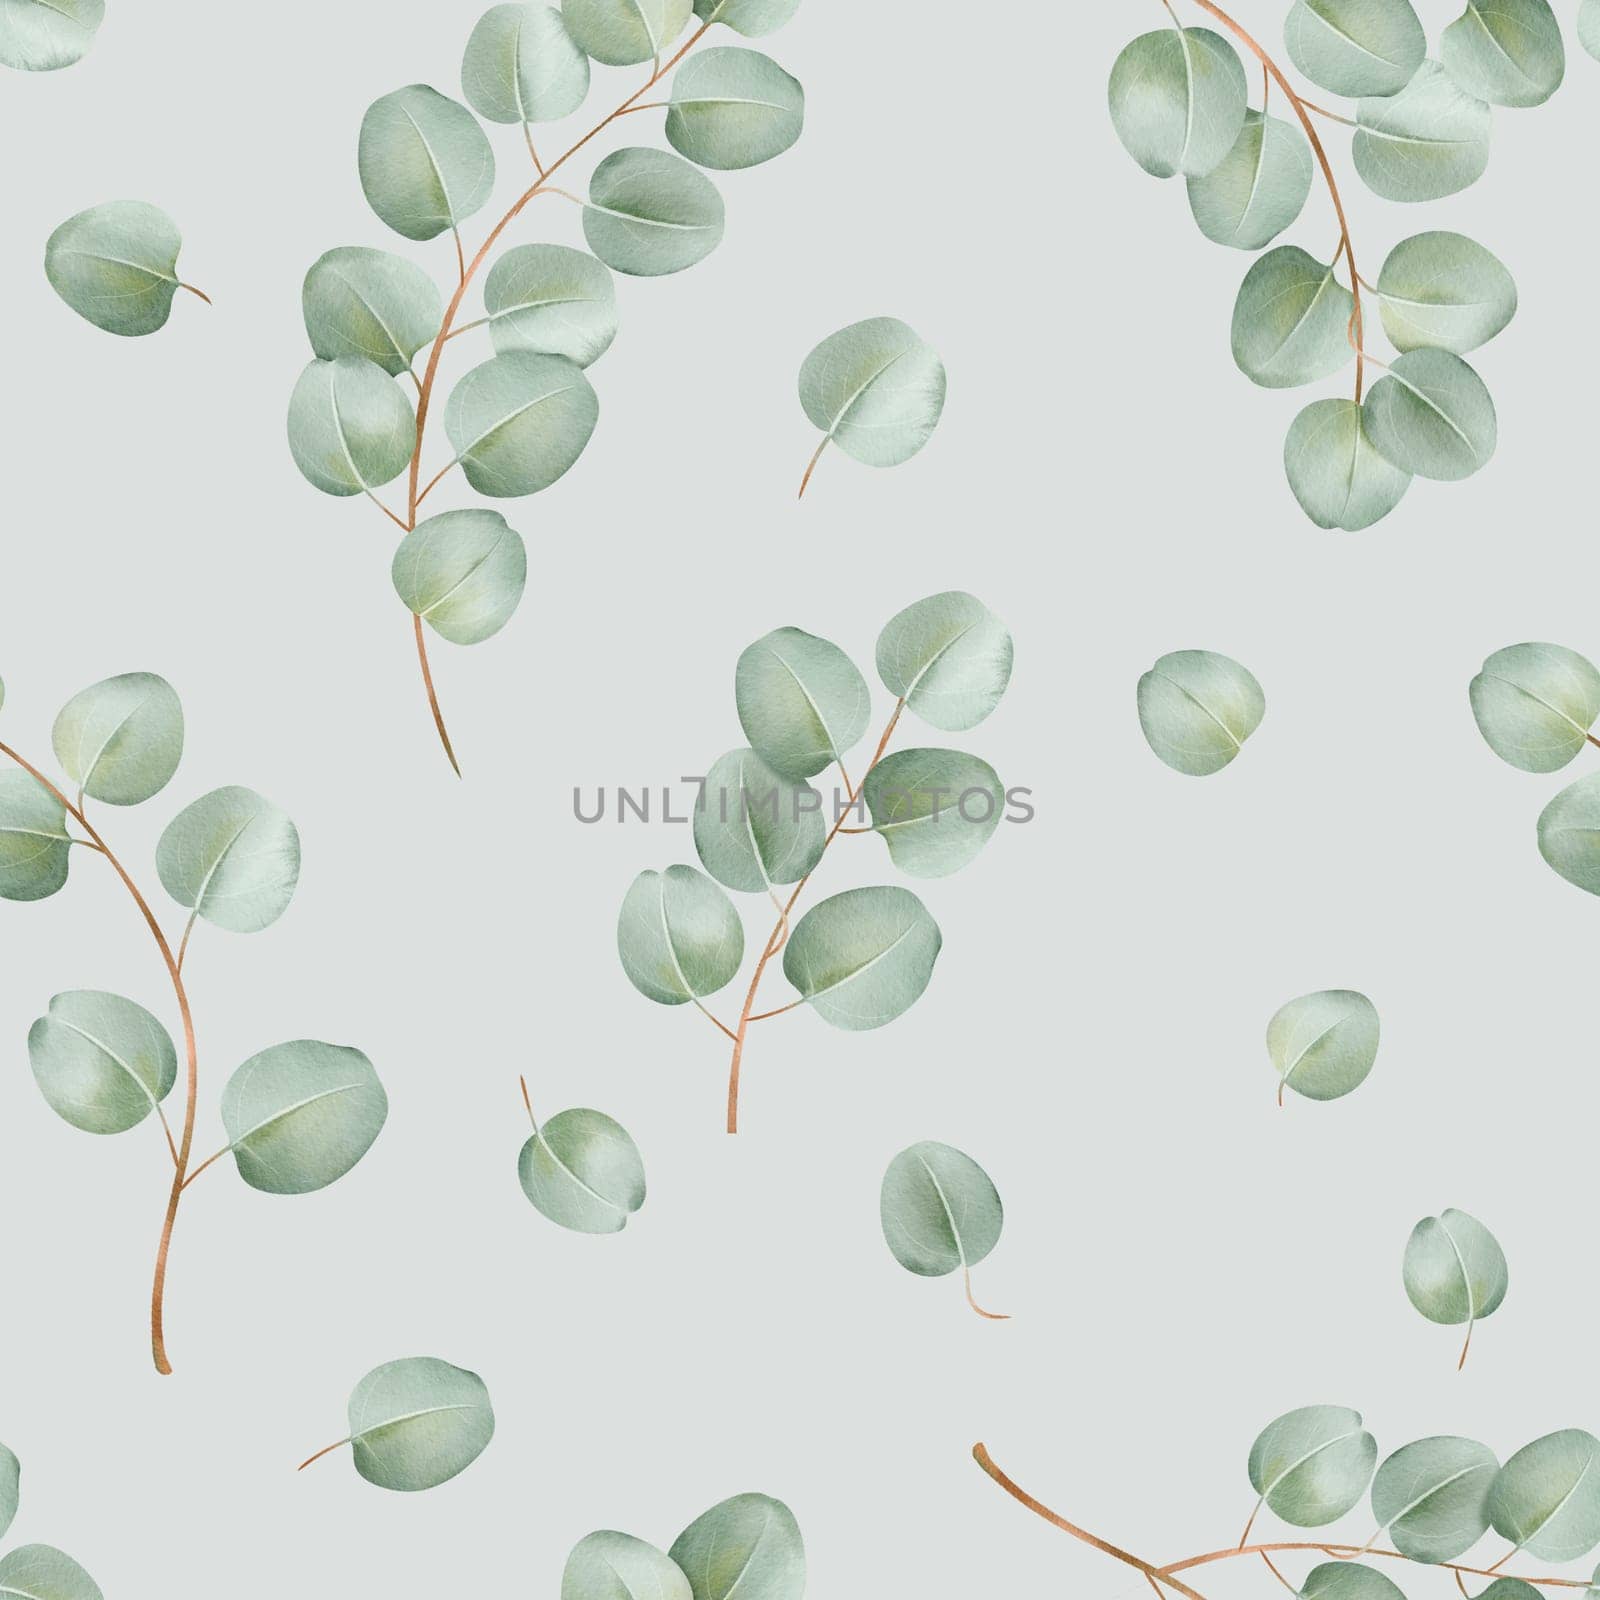 Seamless pattern featuring delicate watercolor eucalyptus branches on a light green backdrop. for wallpaper, fabric design, stationery, packaging. adding a touch of natural beauty and serenity.